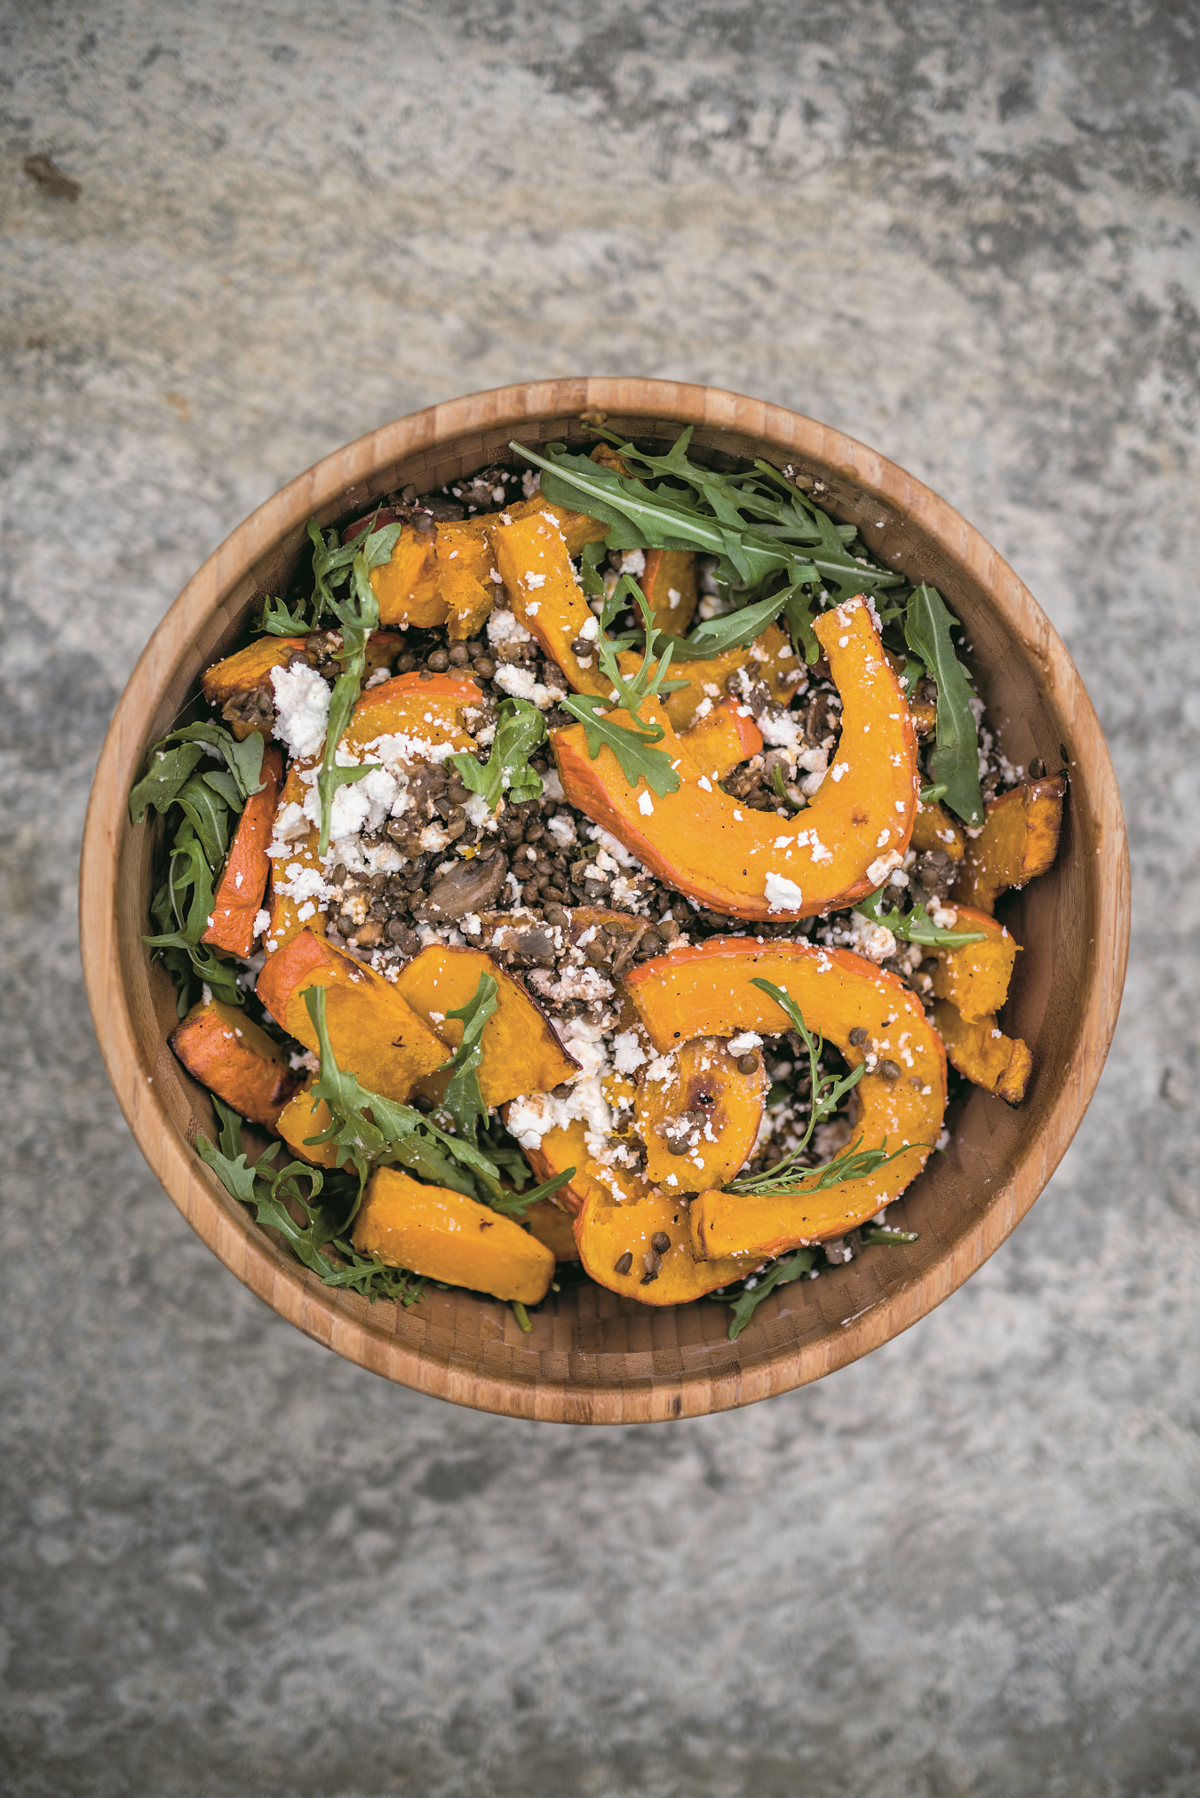 Lentils with Goat’s Cheese and Roasted Pumpkin Salad